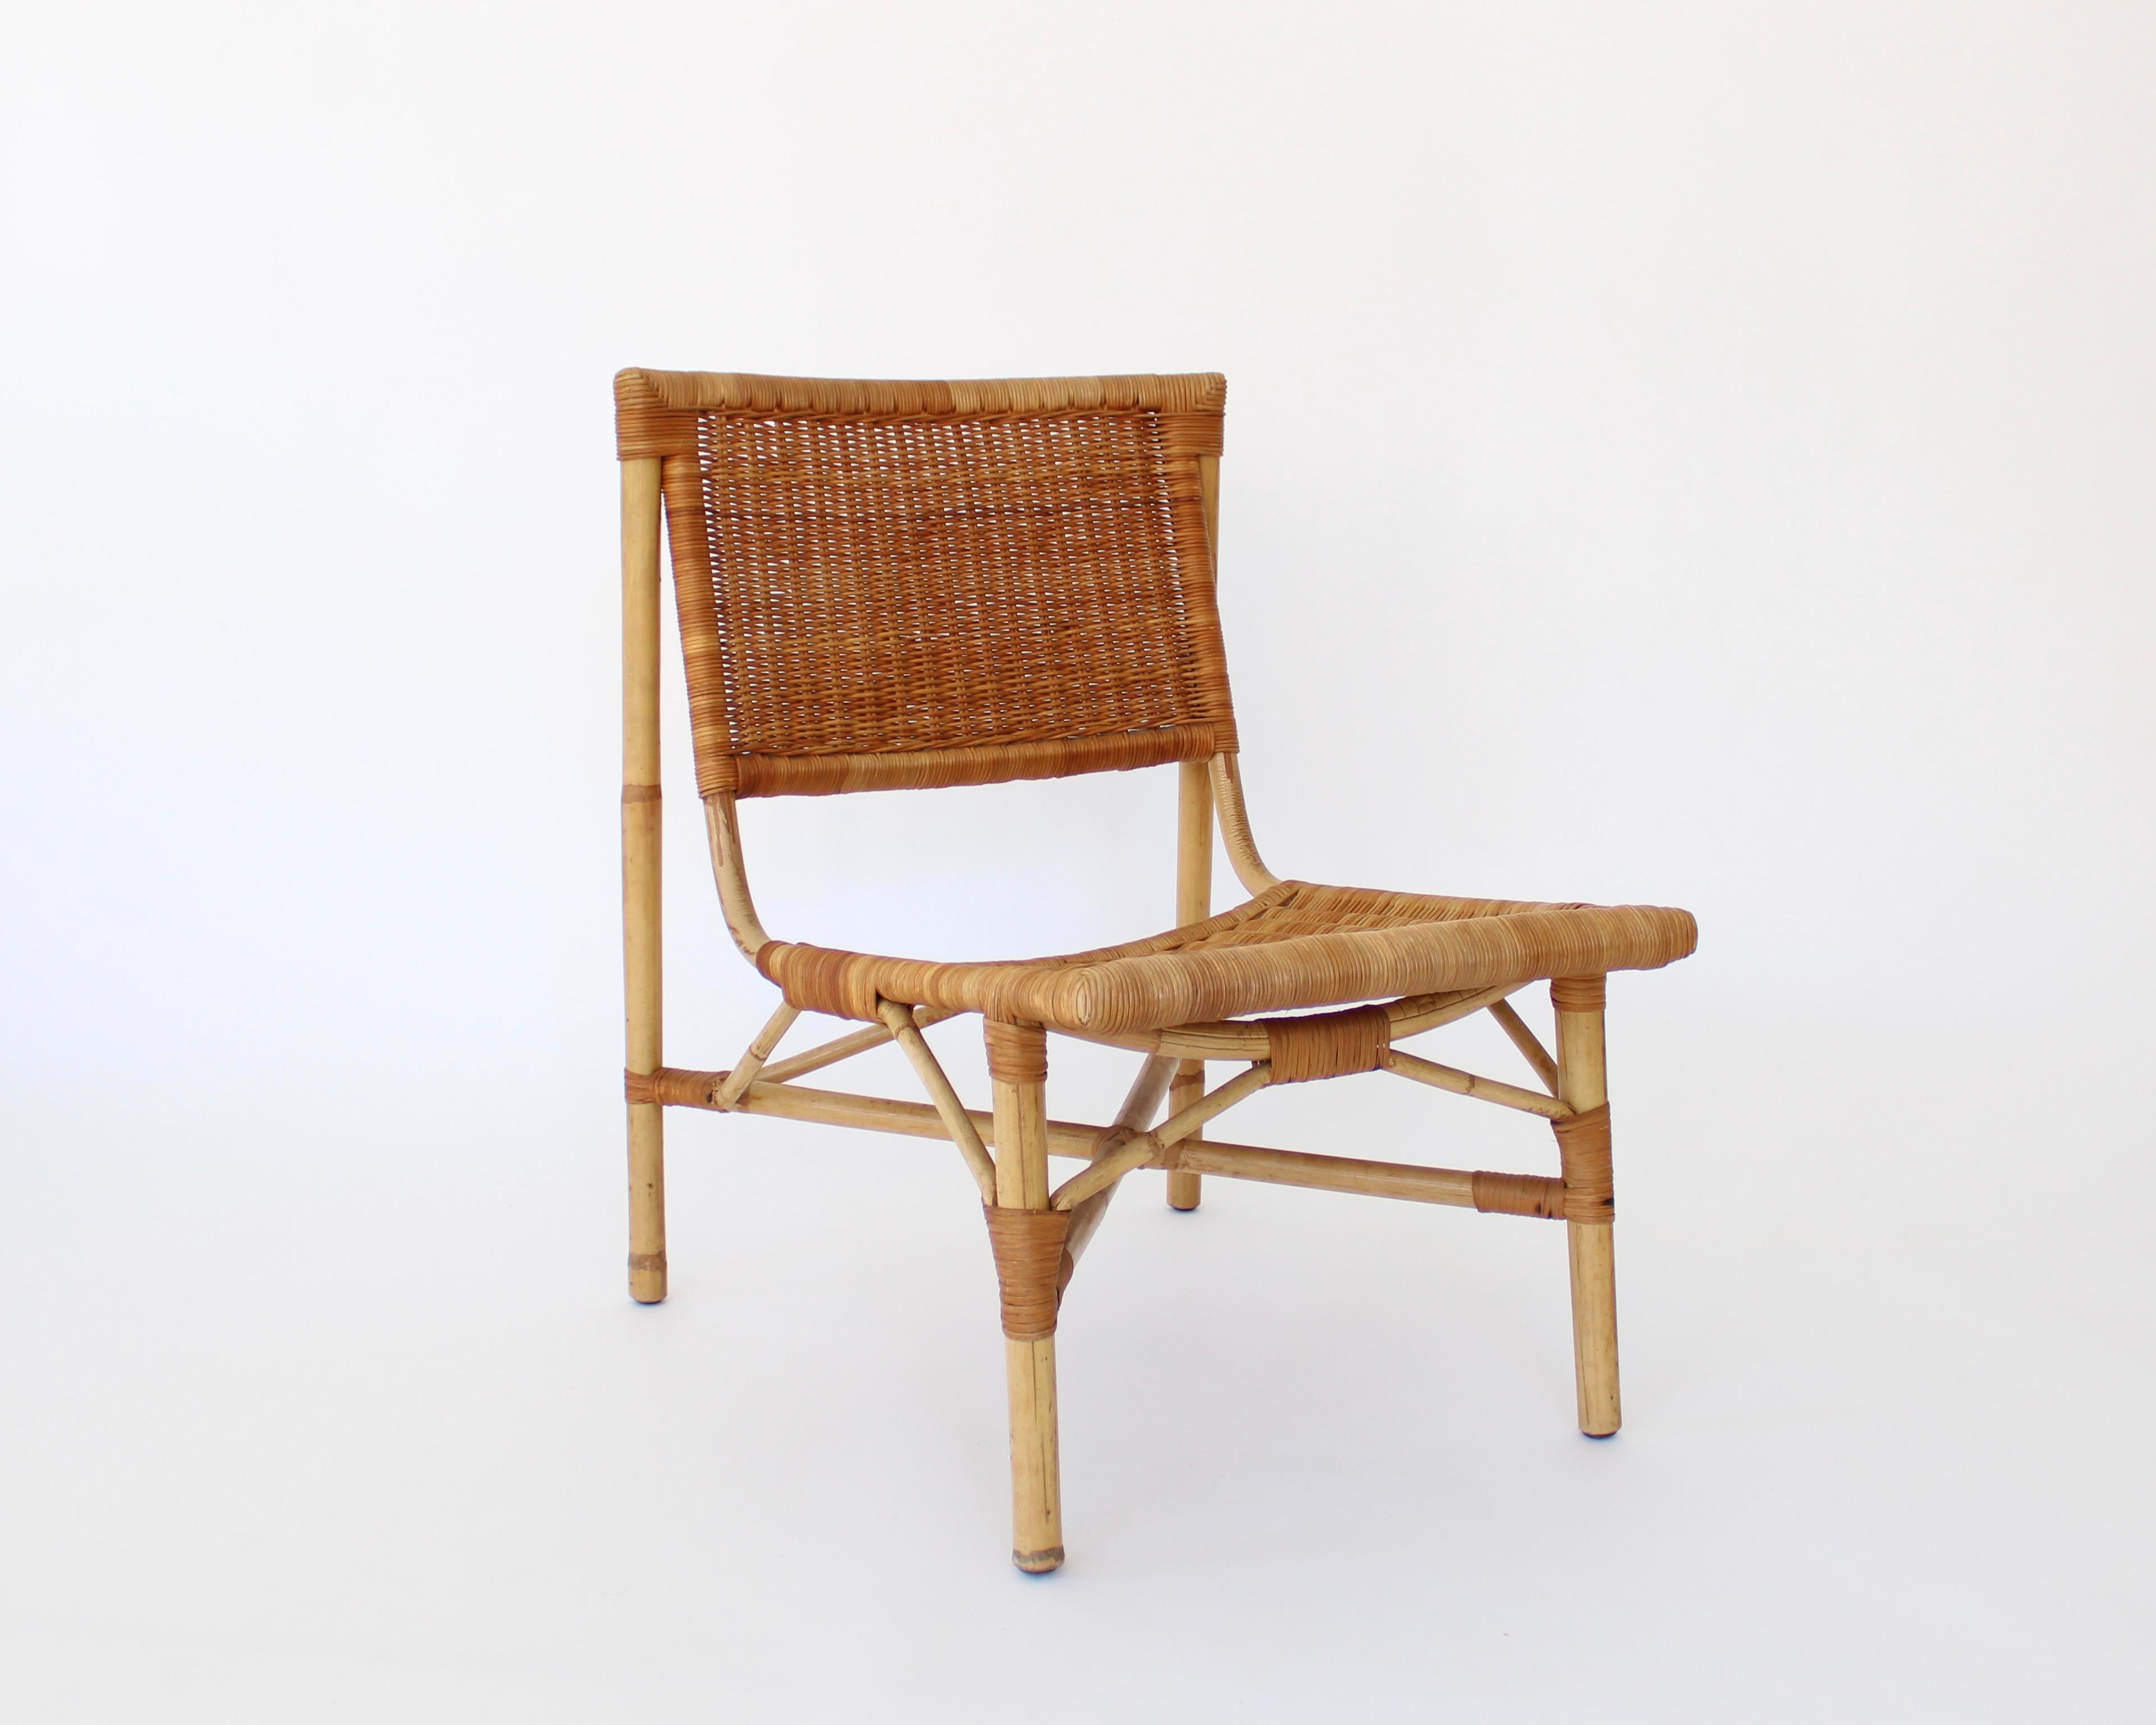 A pair of rattan and bamboo low lounge chairs attributed to French designer Jacques Dumond, France, c 1950.
Excellent condition with no breaks or issues with the rattan or bamboo.
Overall size: 20